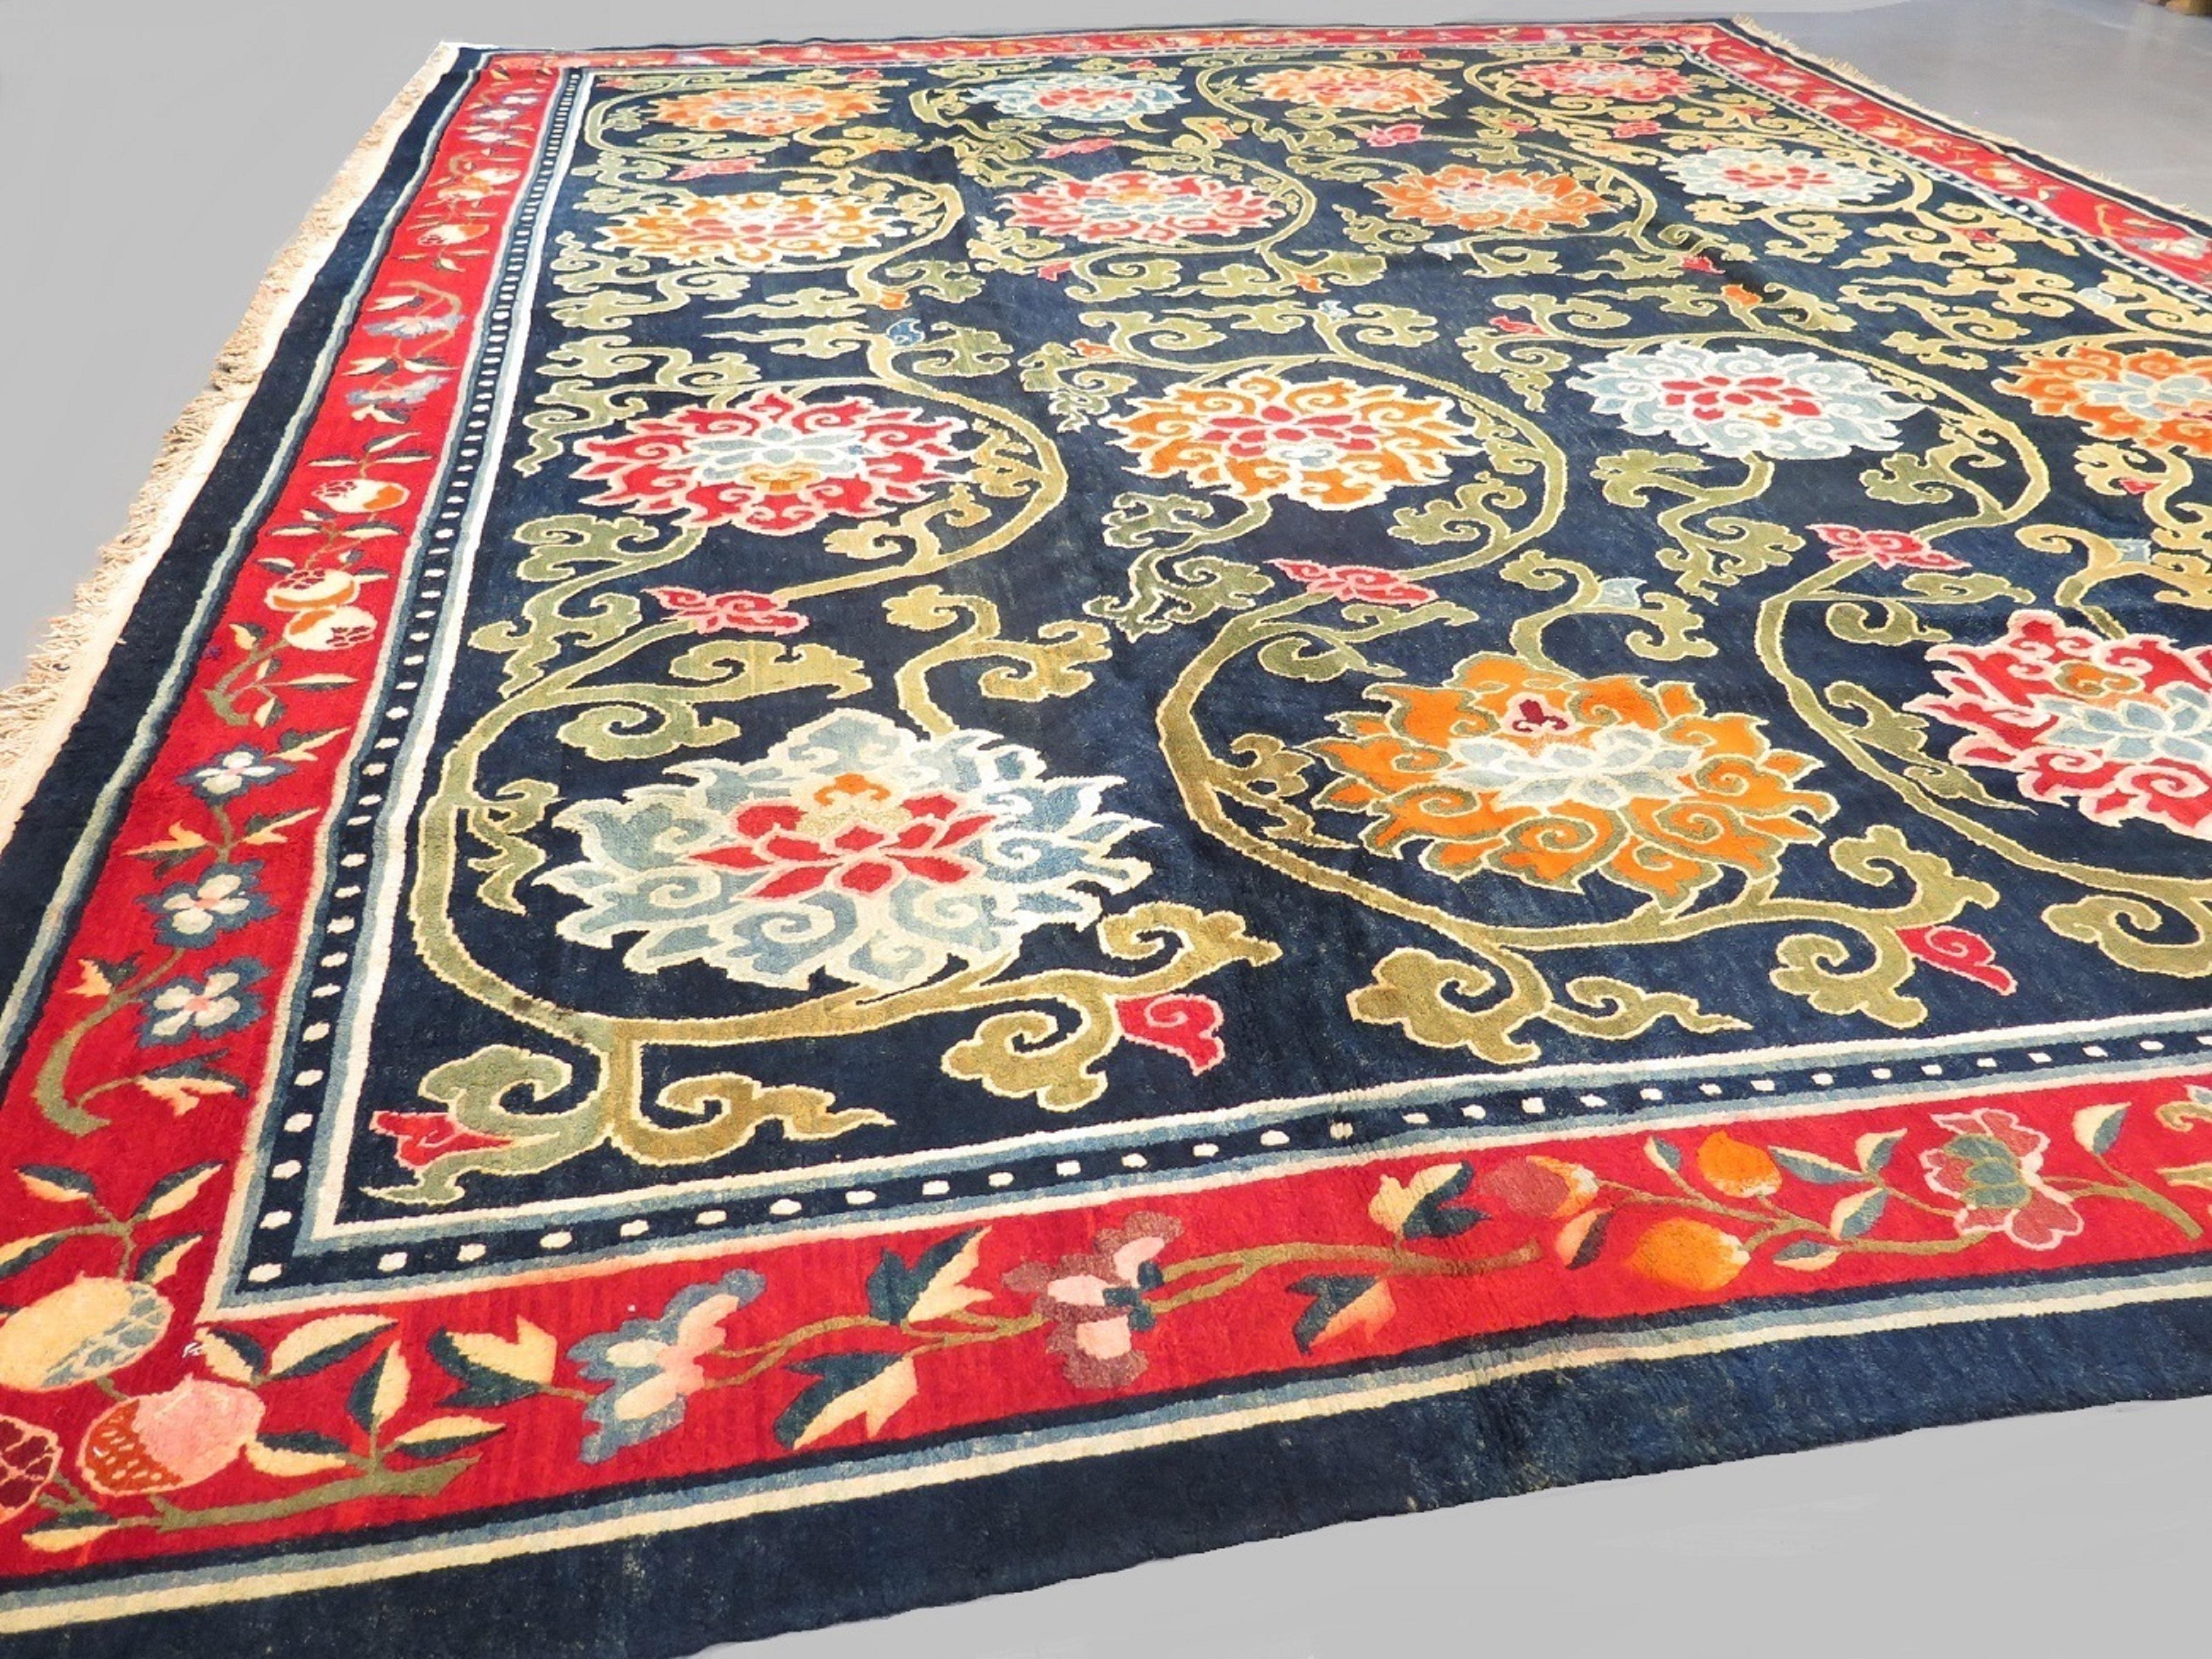 A unique and elegant Tibetan carpet in a rare room-size format - likely commissioned at the time for a member of the nobility, as most Tibetan pieces of the period were woven in a small rug format. The blue field provides a great contrast to the